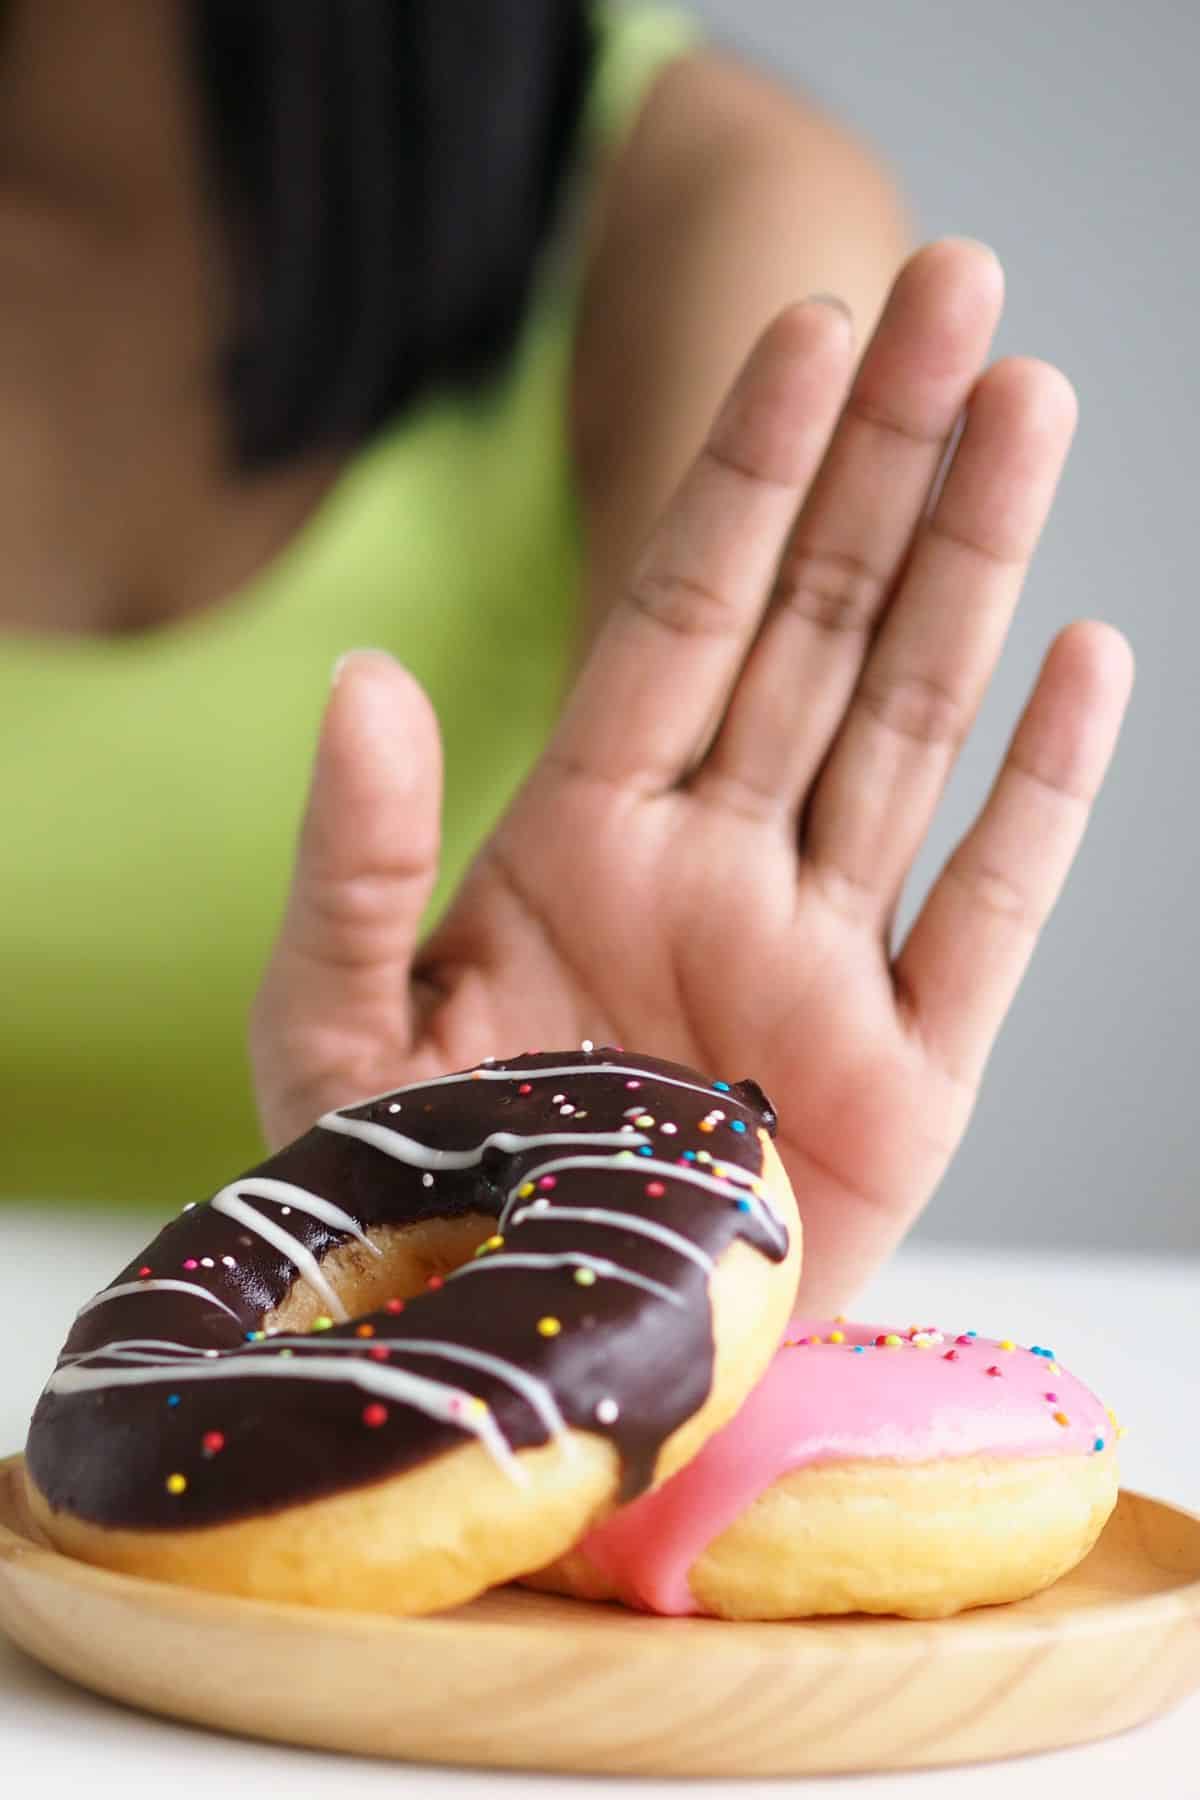 a woman with her hand up in front of a plate of two donuts.